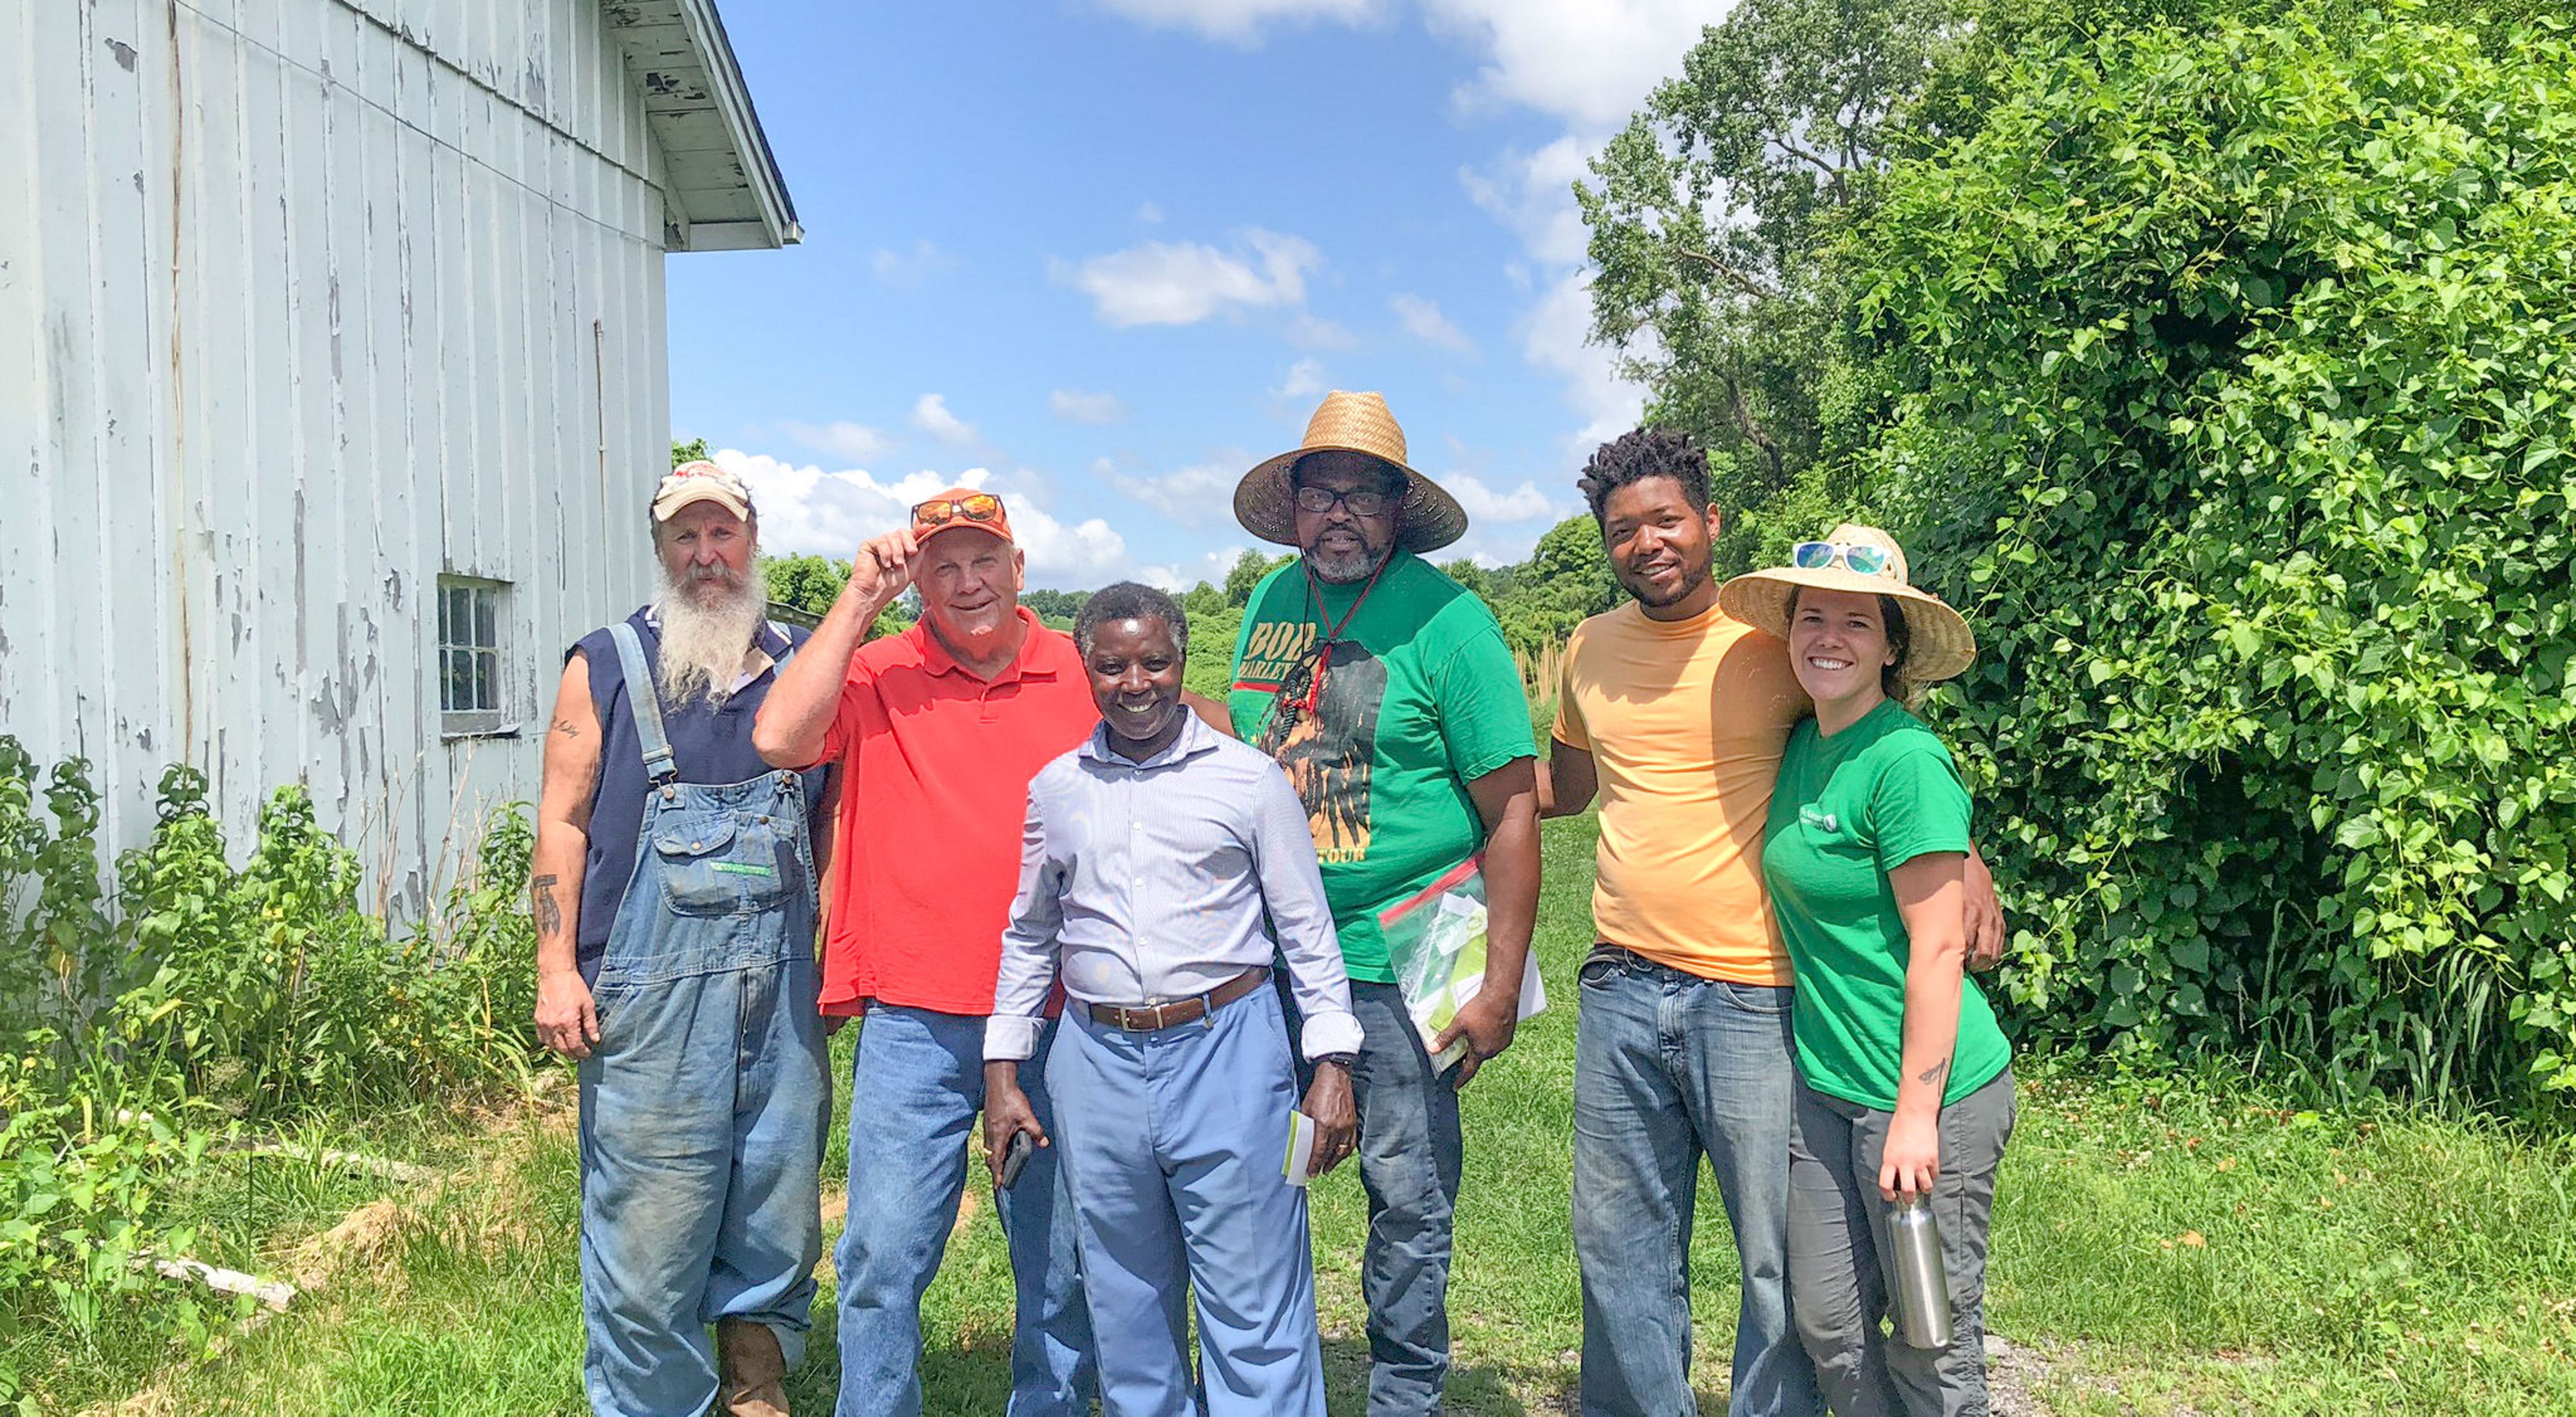 Pastor Bruce Carroll (back, center) of Green The Church visits with Rebecca Weaver (right), Pastor Paul (front, center) & Gibron Jones (2nd from right) at Confluence Farms.